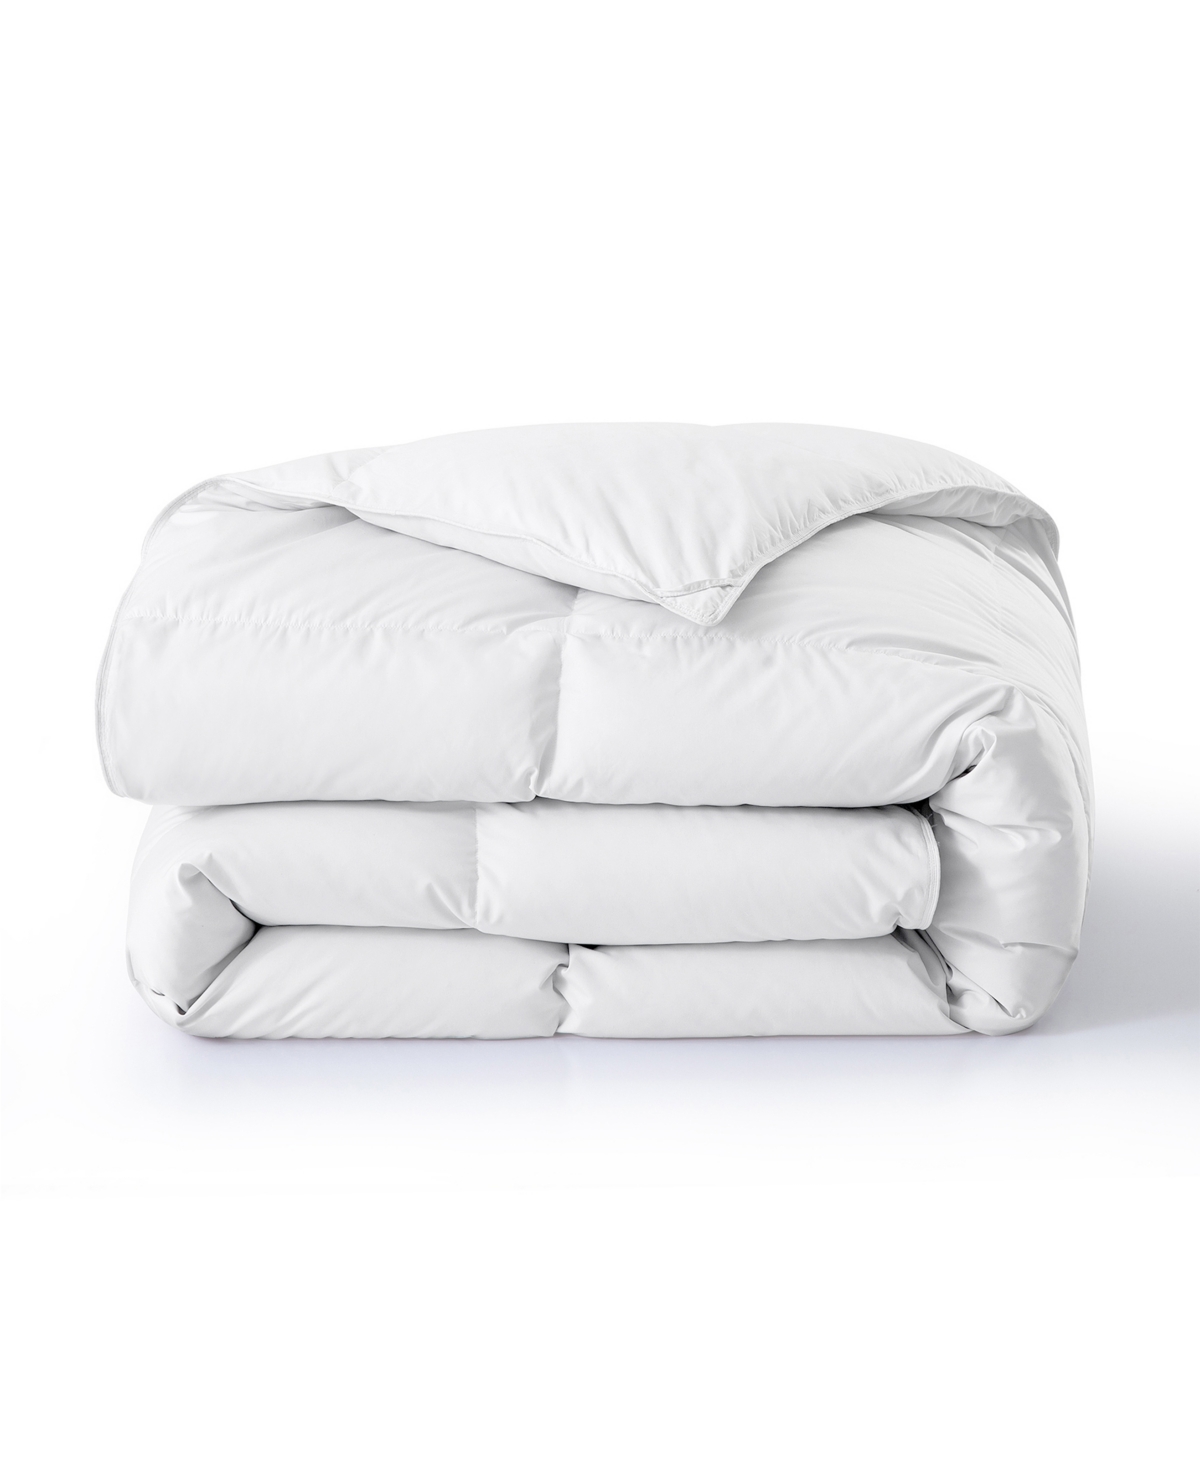 Unikome Medium Weight Extra Soft Goose Down Feather Comforter, Full/queen In White